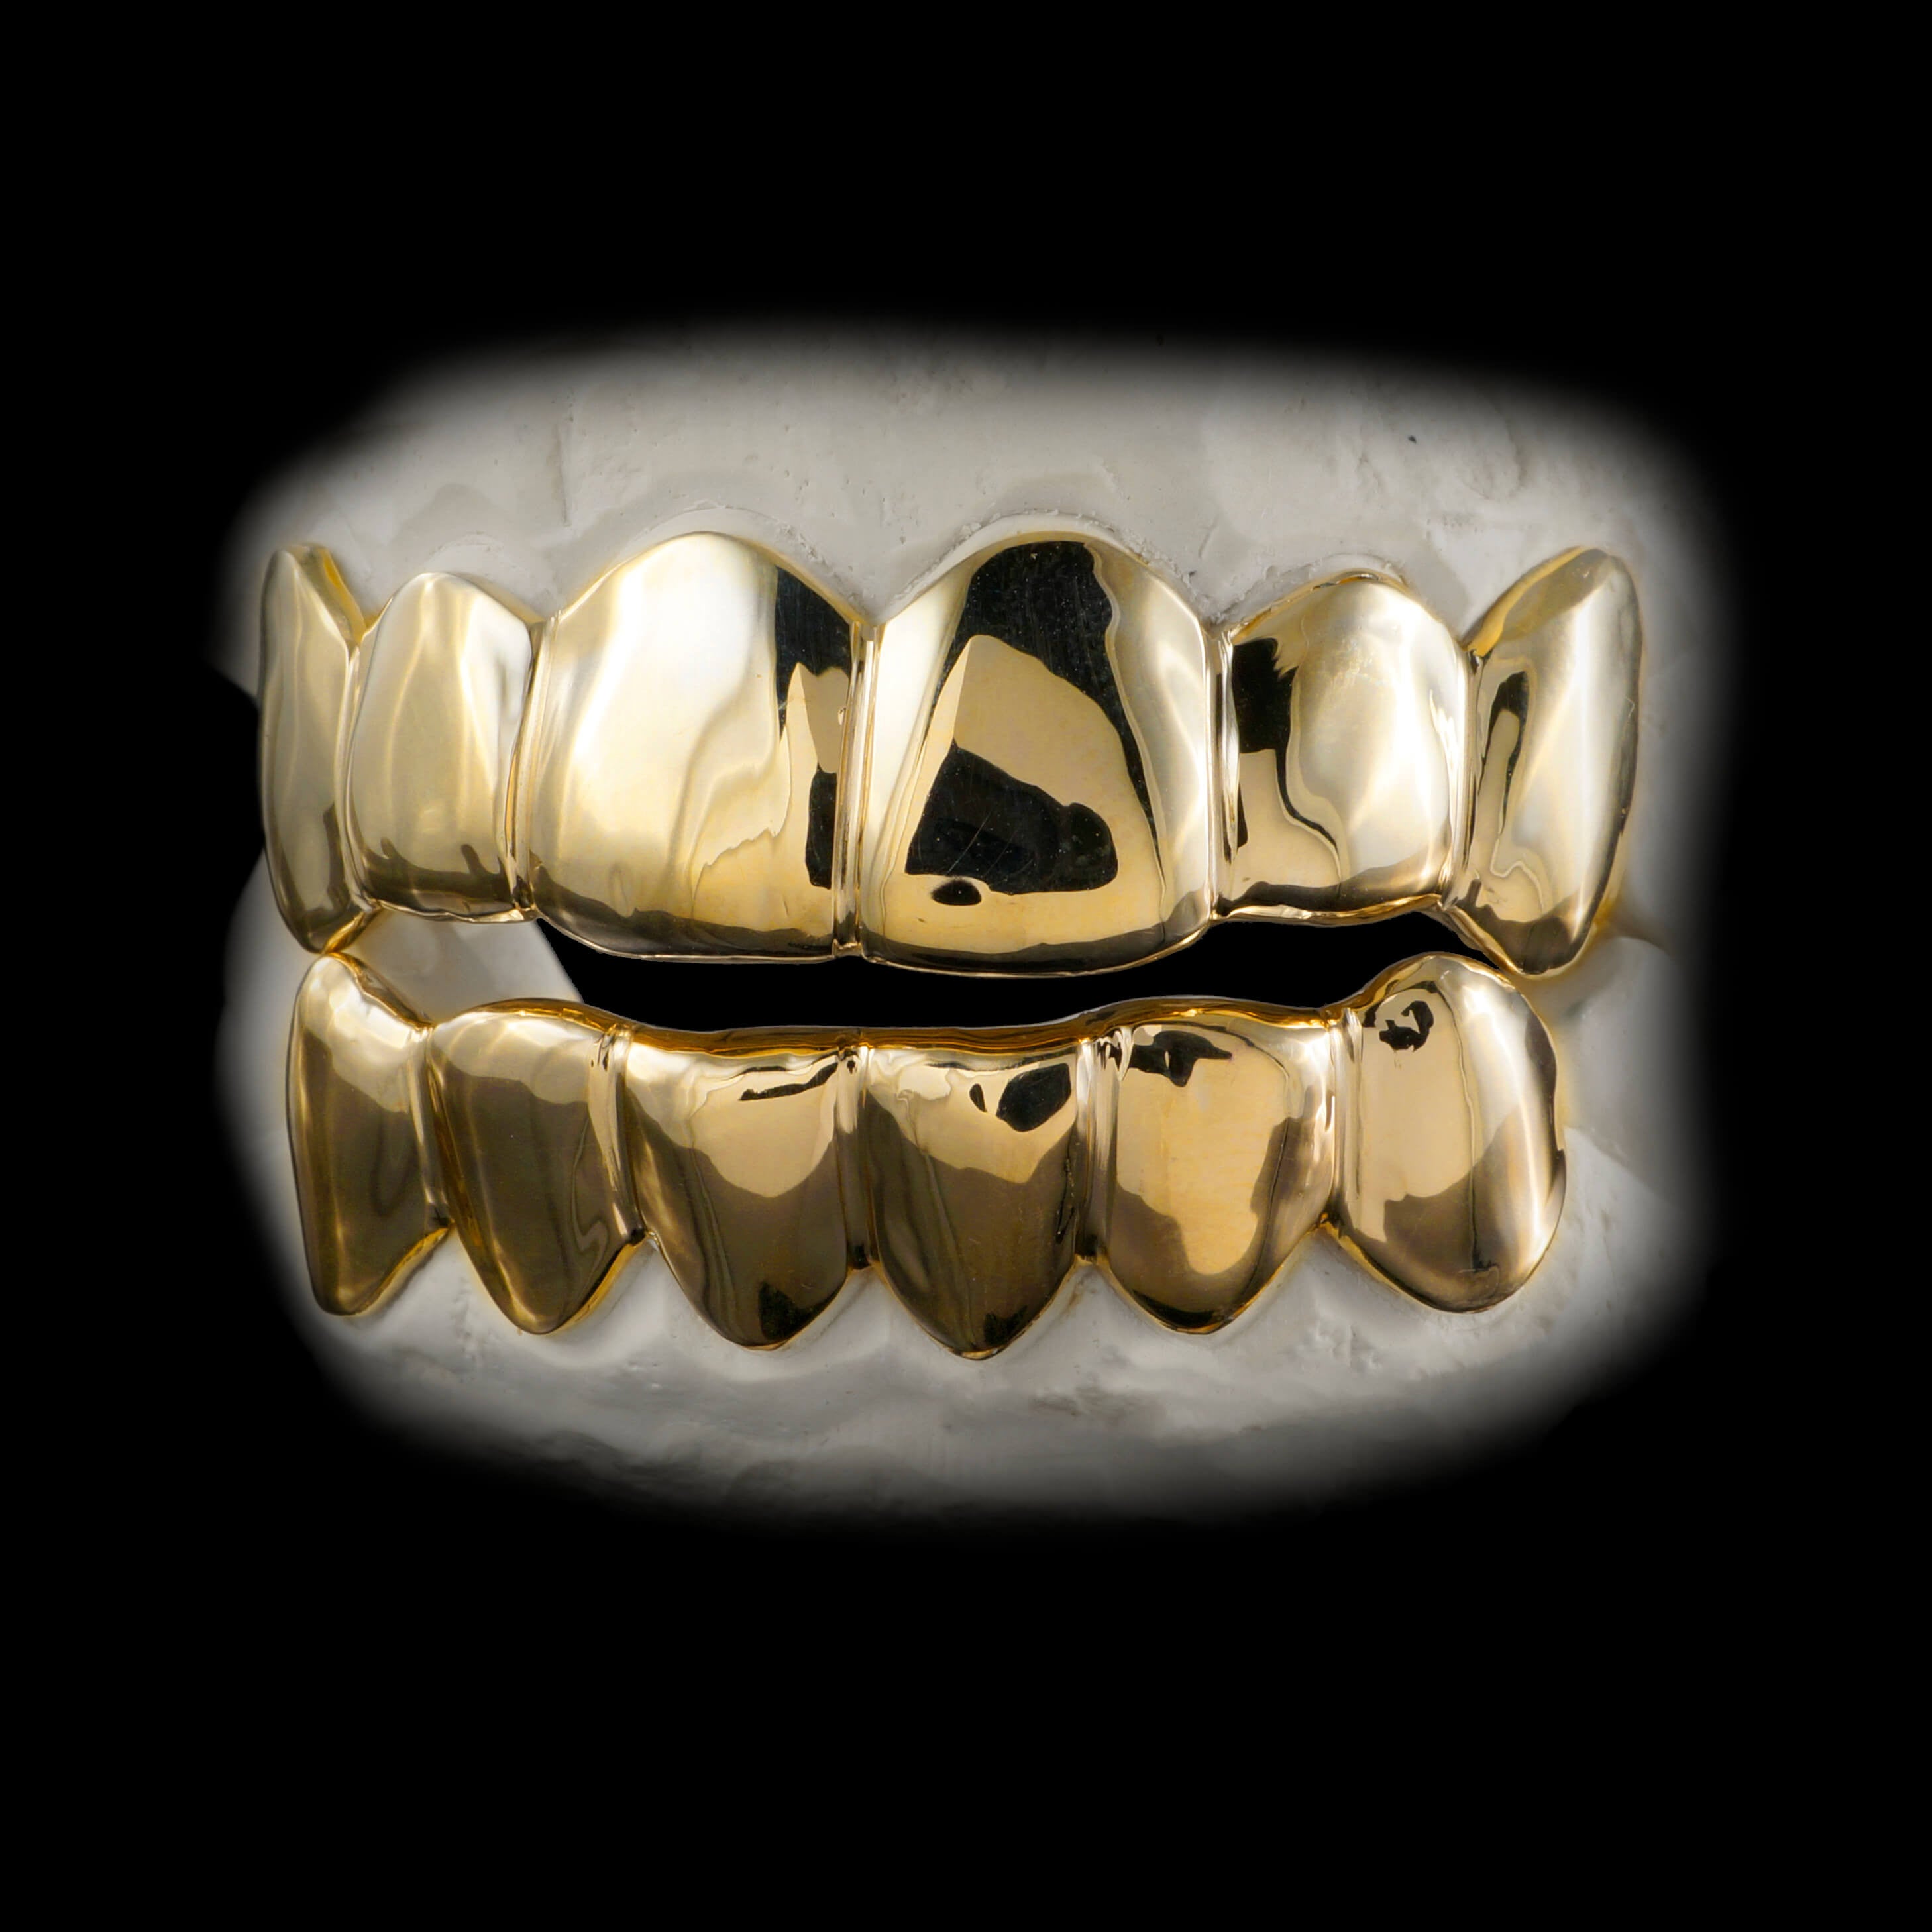 How Expensive Are Grillz? Price Ranges and Materials